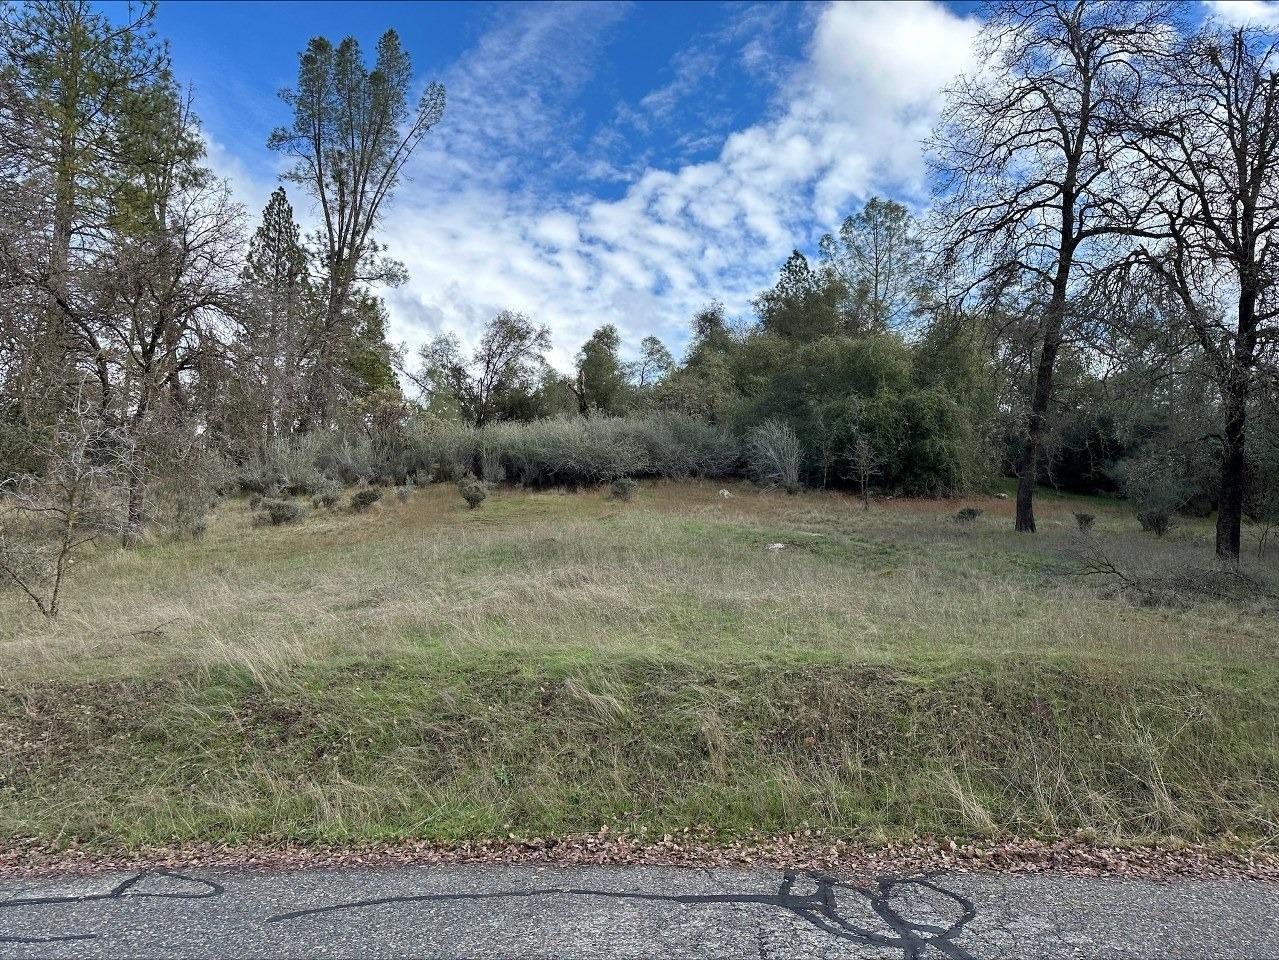 Explore this stunning 2.01+/- acre lot near Highway 41. With lots of wildlife, beautiful pine and oak trees, as well as easy access to 41 and minimal road noise, this truly is a gem! This property has access to power on the street. Stop by and enjoy the beautiful neighborhood as you envision your dream home being built on this lot!